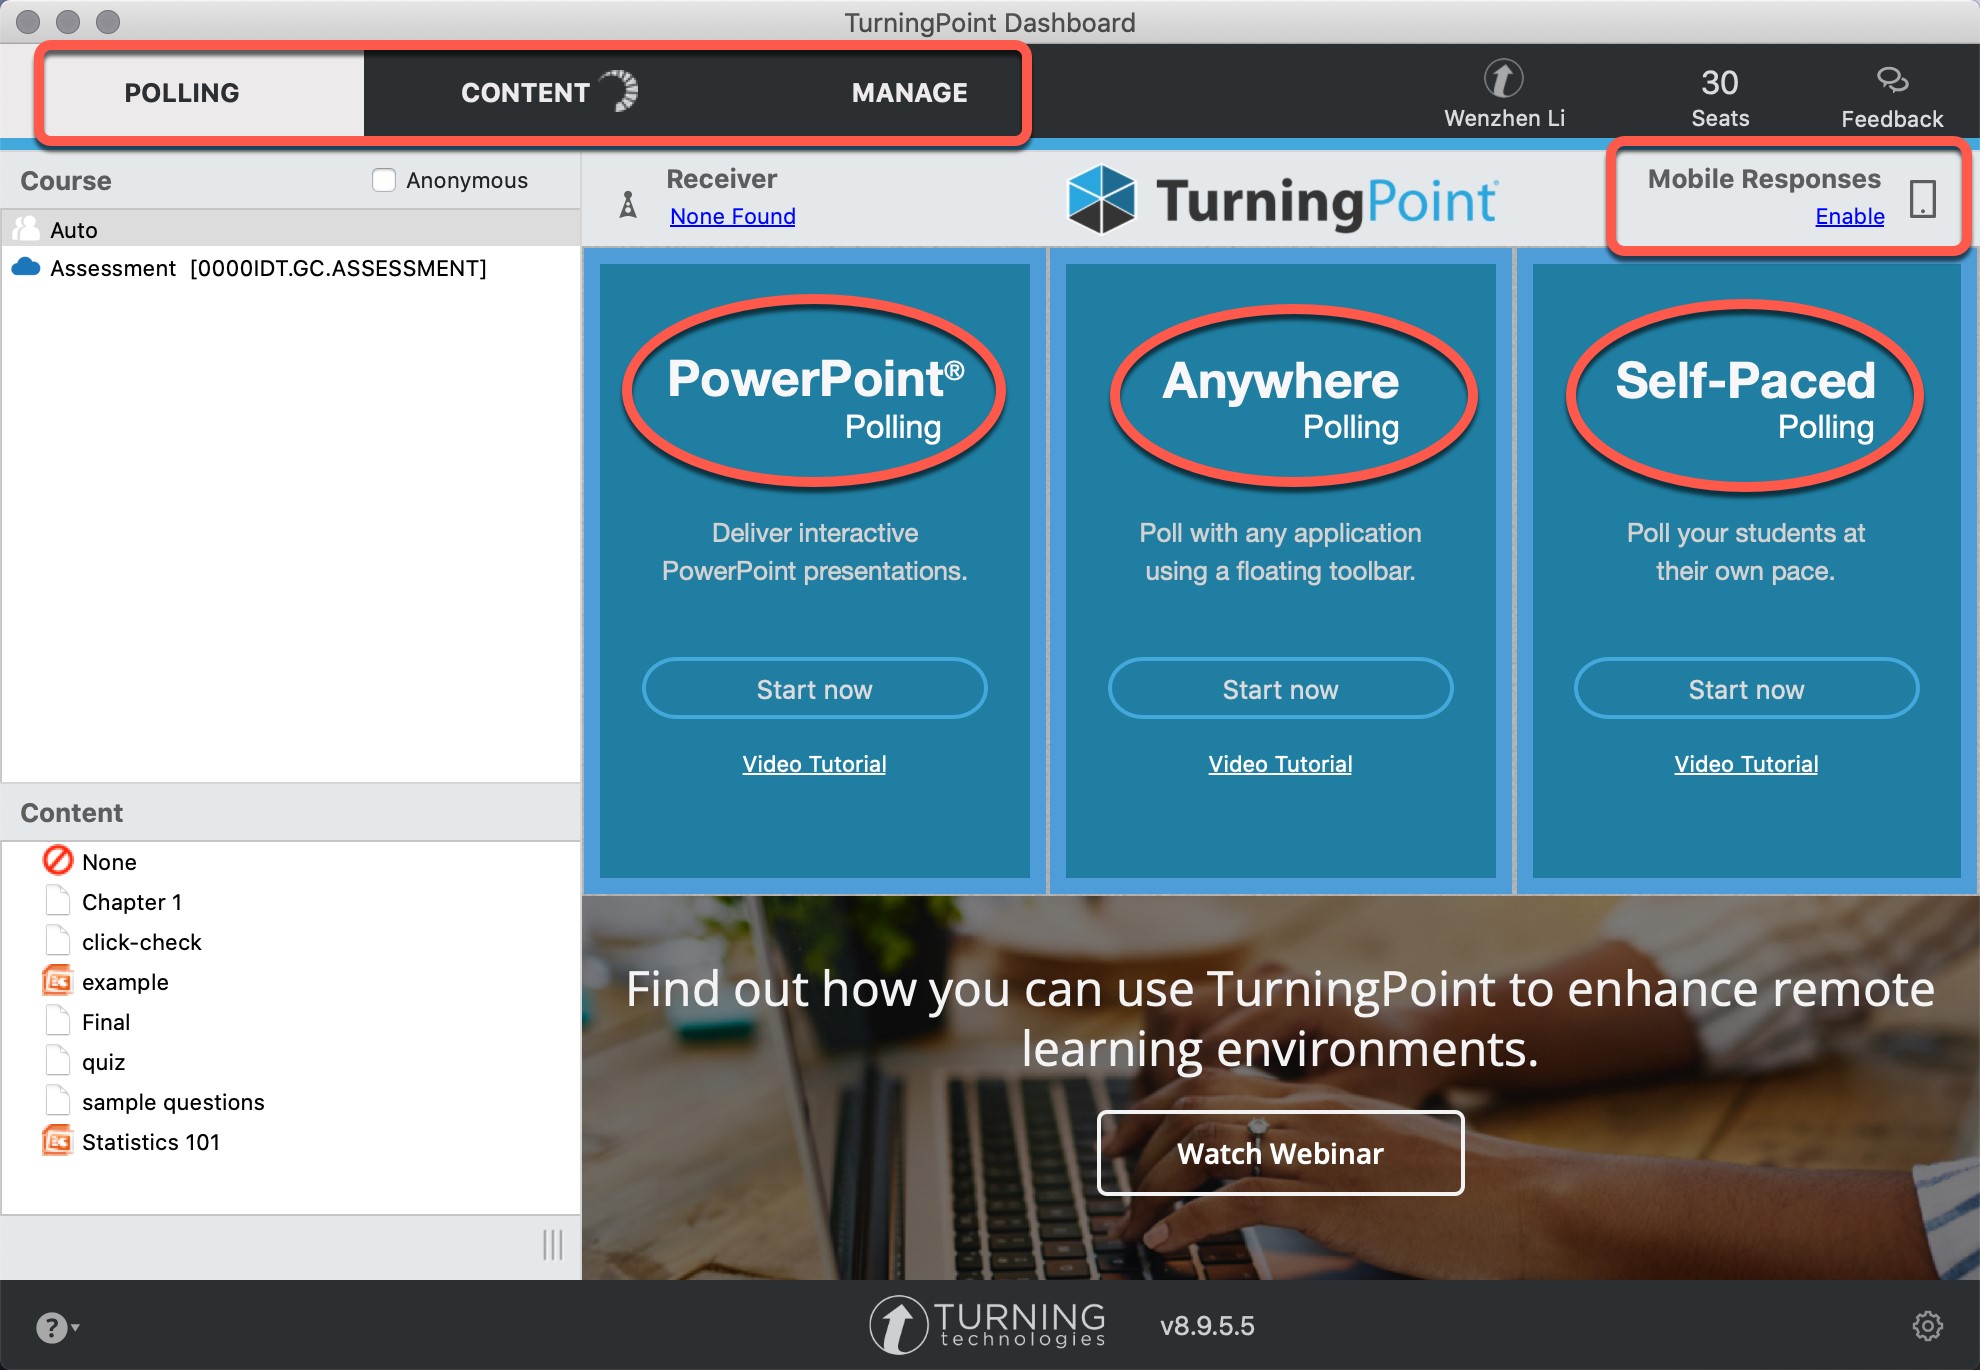 A screenshot of TurningPoint desktop app dashboard. The three tabs, Polling, Content, Manage, are marked with an orange box. The three polling options, PowerPoint Polling, Anywhere Polling, and Self-Paced Polling, are called out for attention. The Enable Mobile Responses button is also highlighted.